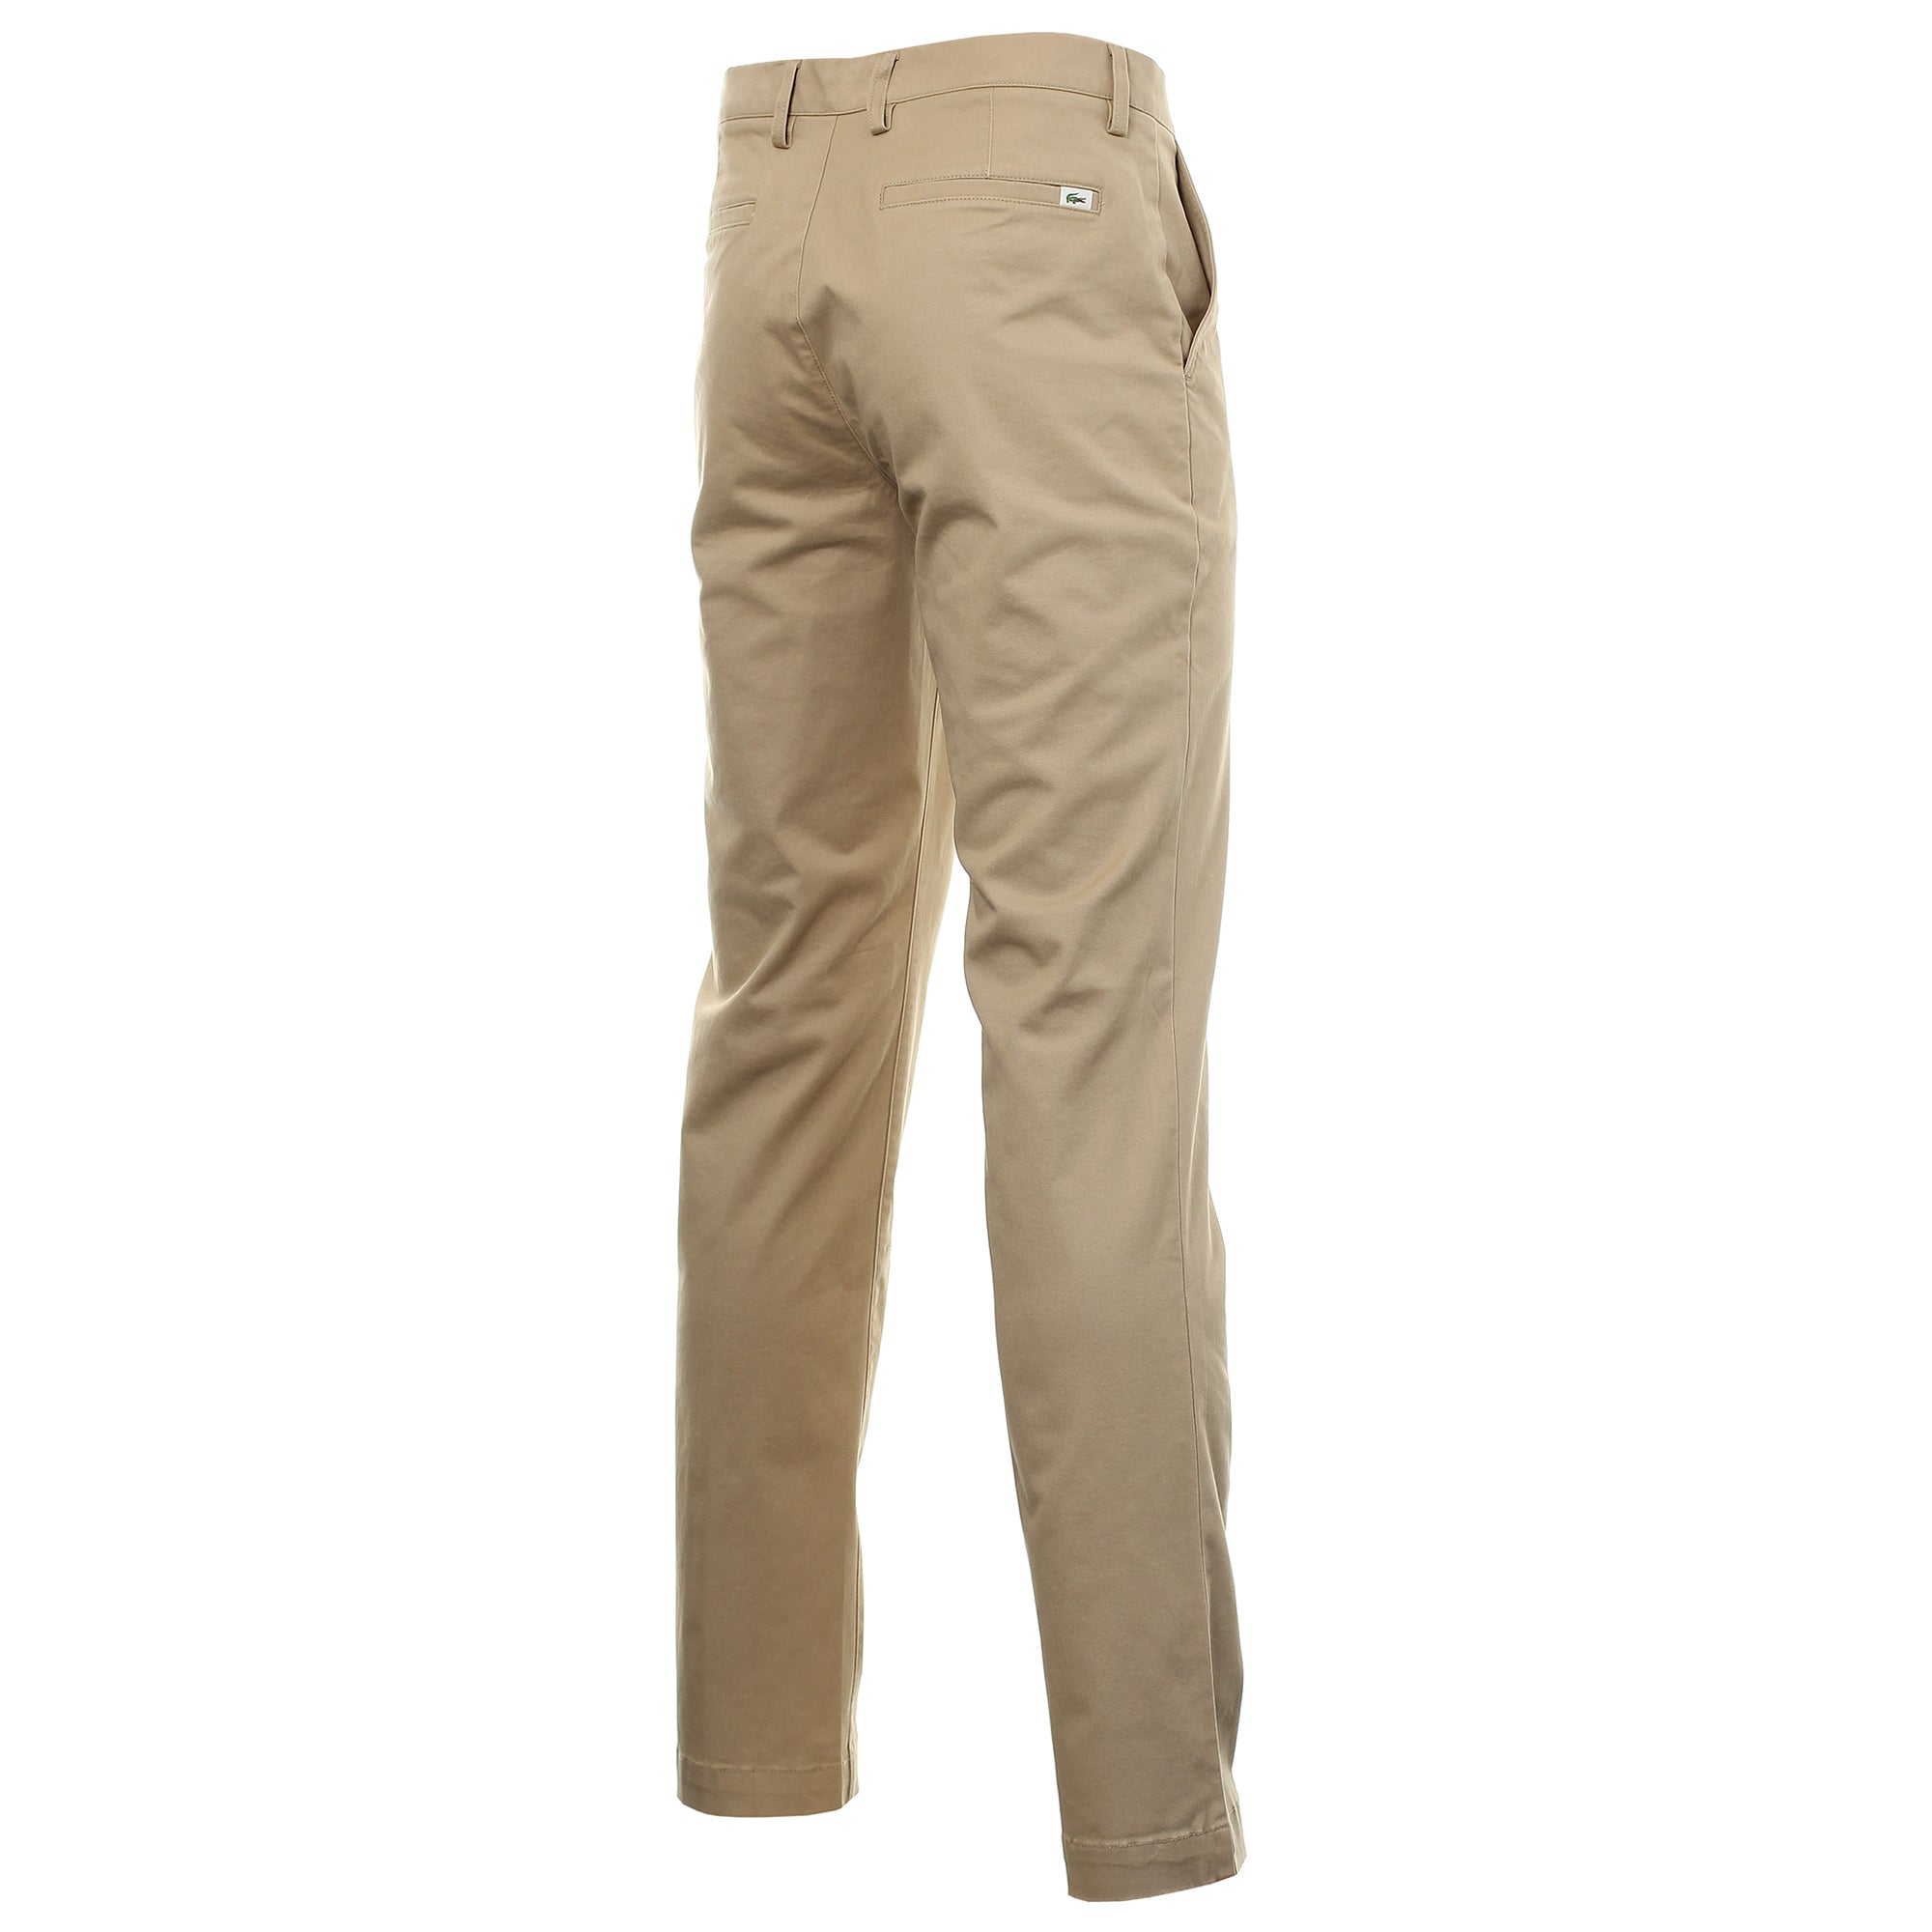 Lacoste Stretch Chino Pant HH9553 Beige 02S | Function18